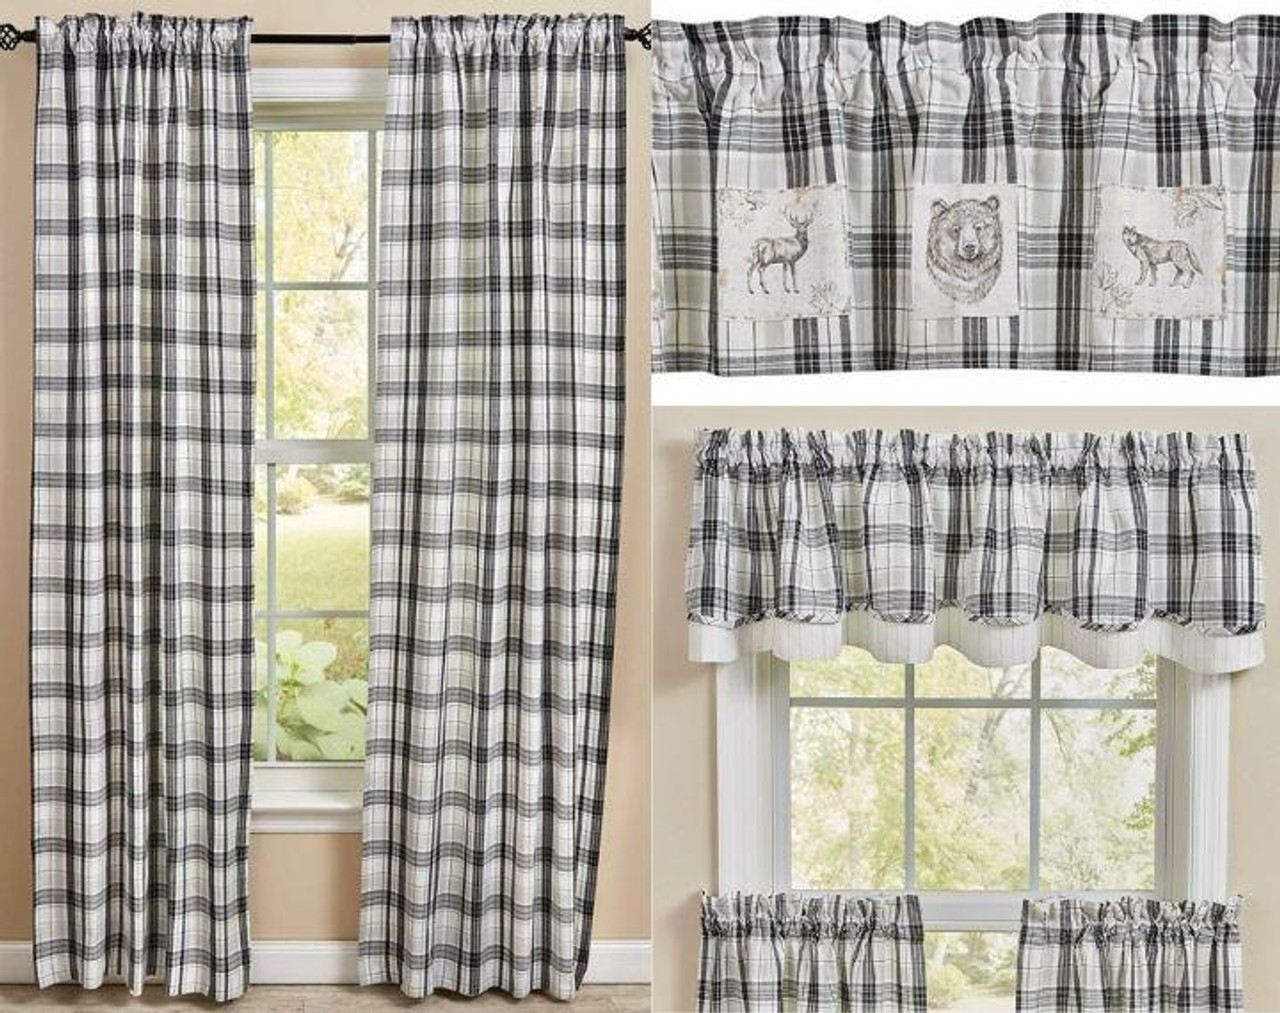 fascinating design of window curtain styles